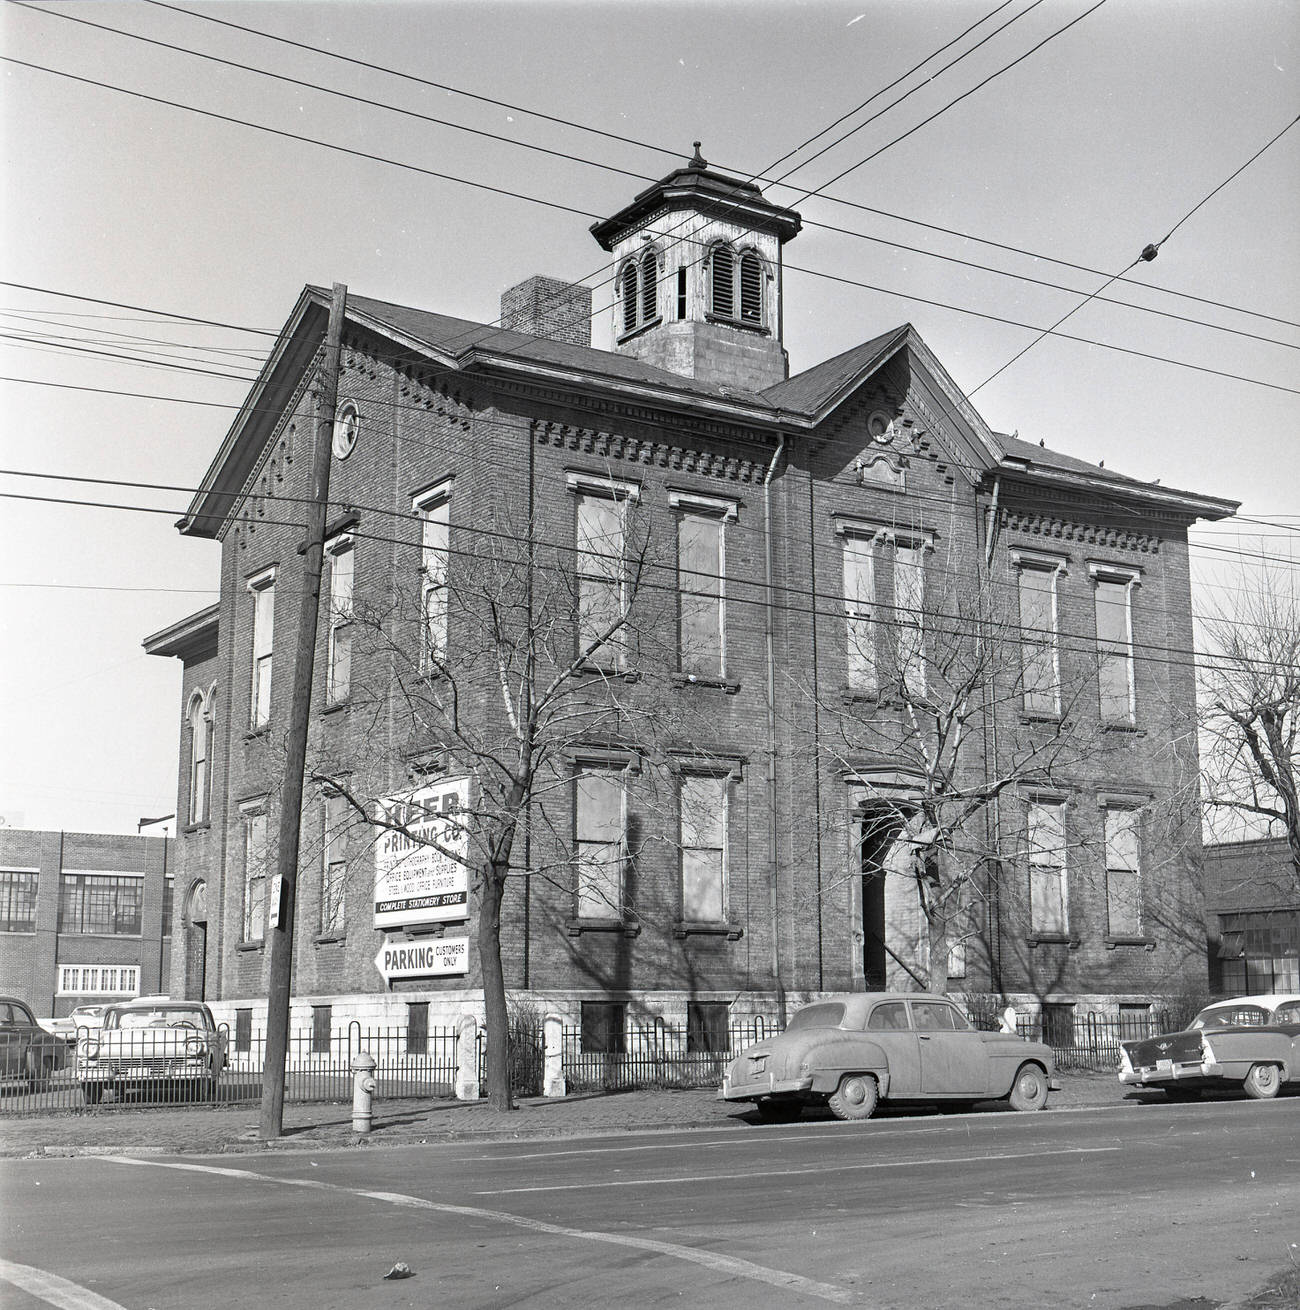 Fourth Street Elementary School, opened in 1870 and auctioned off in 1955, Circa 1961.